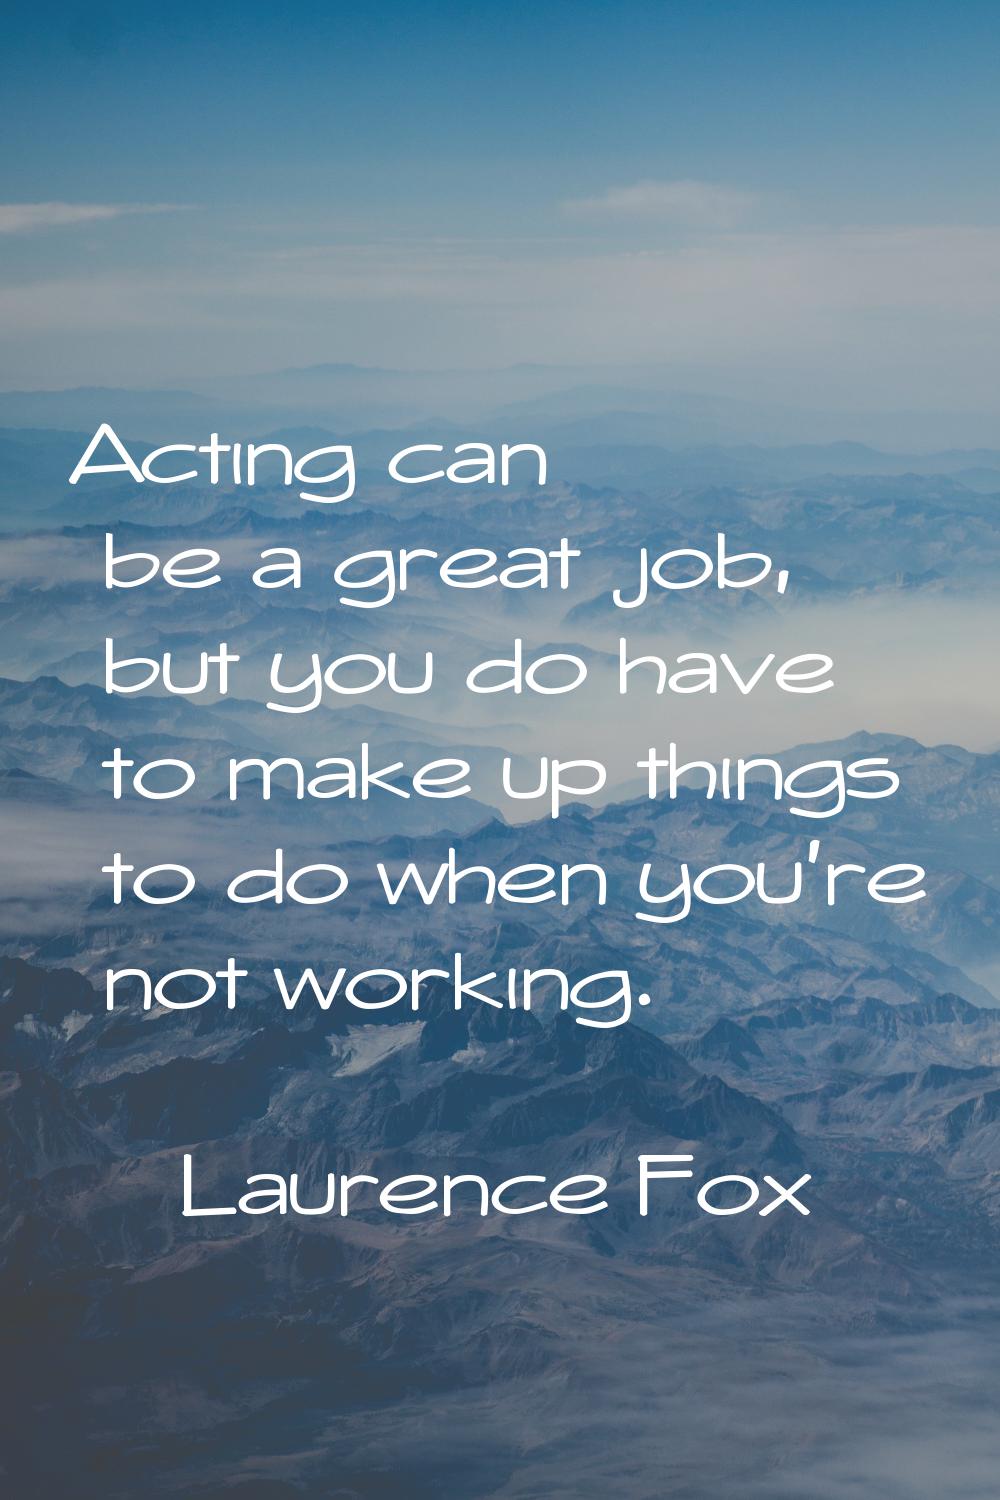 Acting can be a great job, but you do have to make up things to do when you're not working.